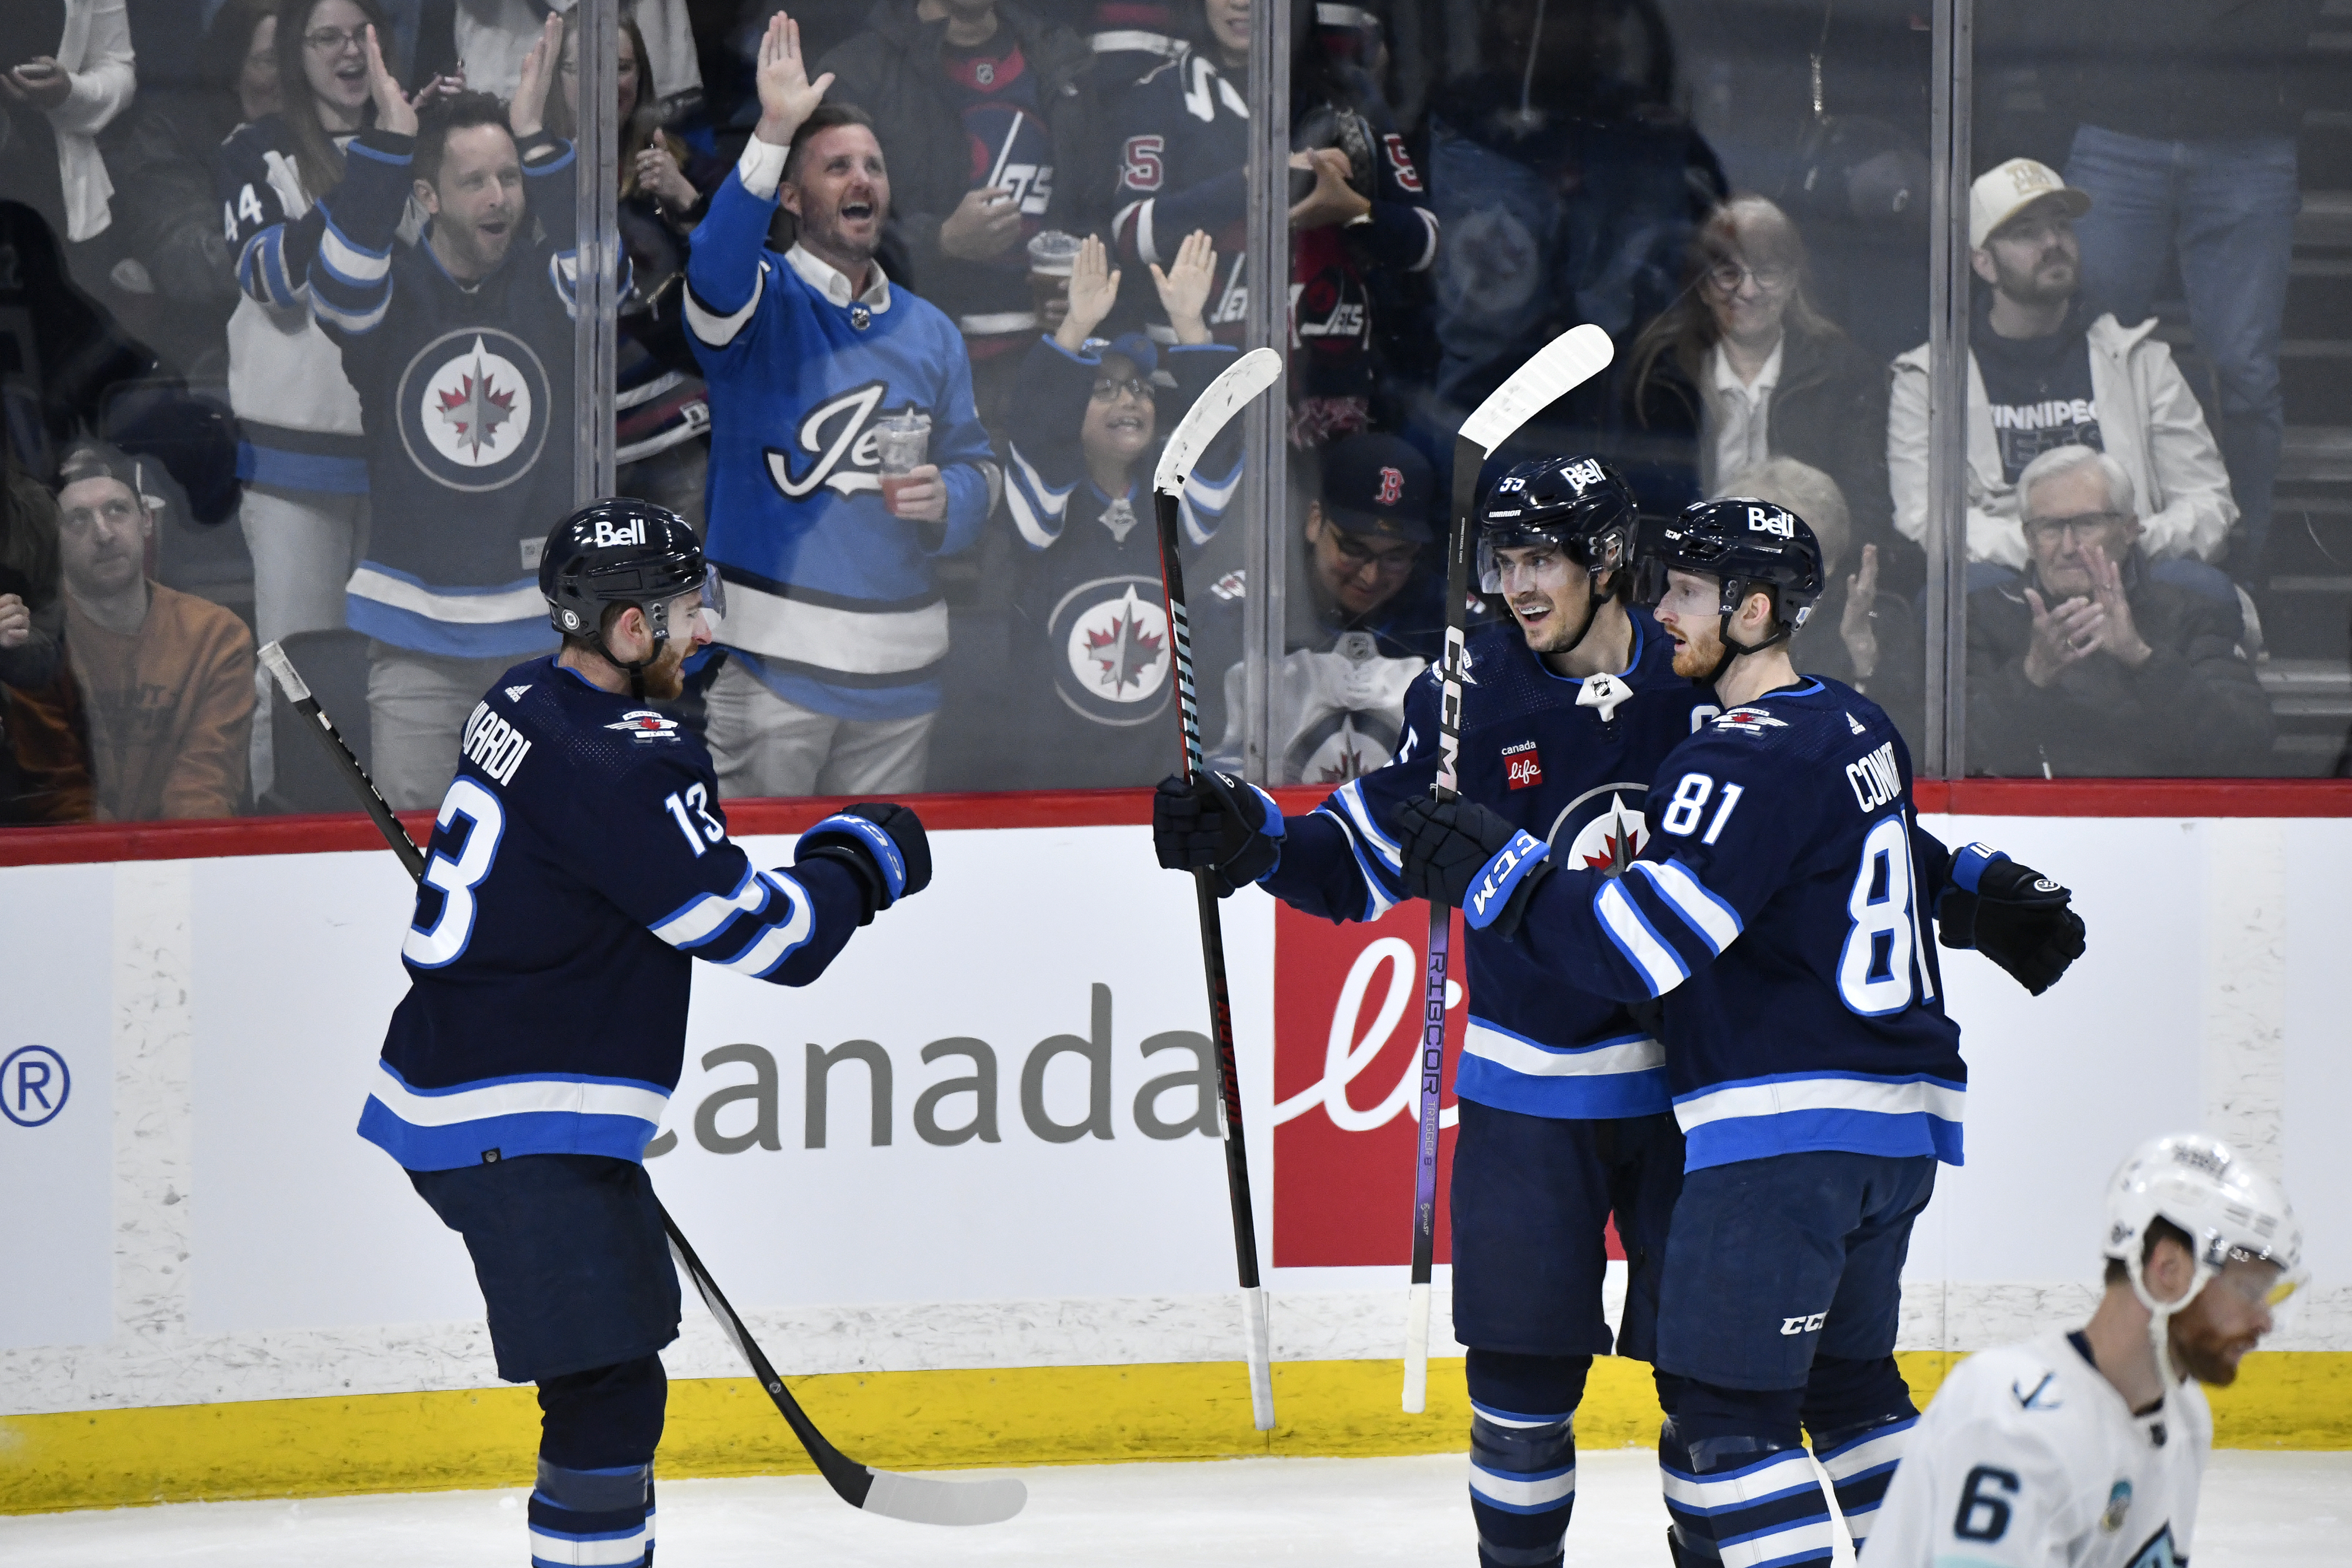 Winnipeg Jets secure home ice in round 1 of playoffs with 4-3 win over
Seattle